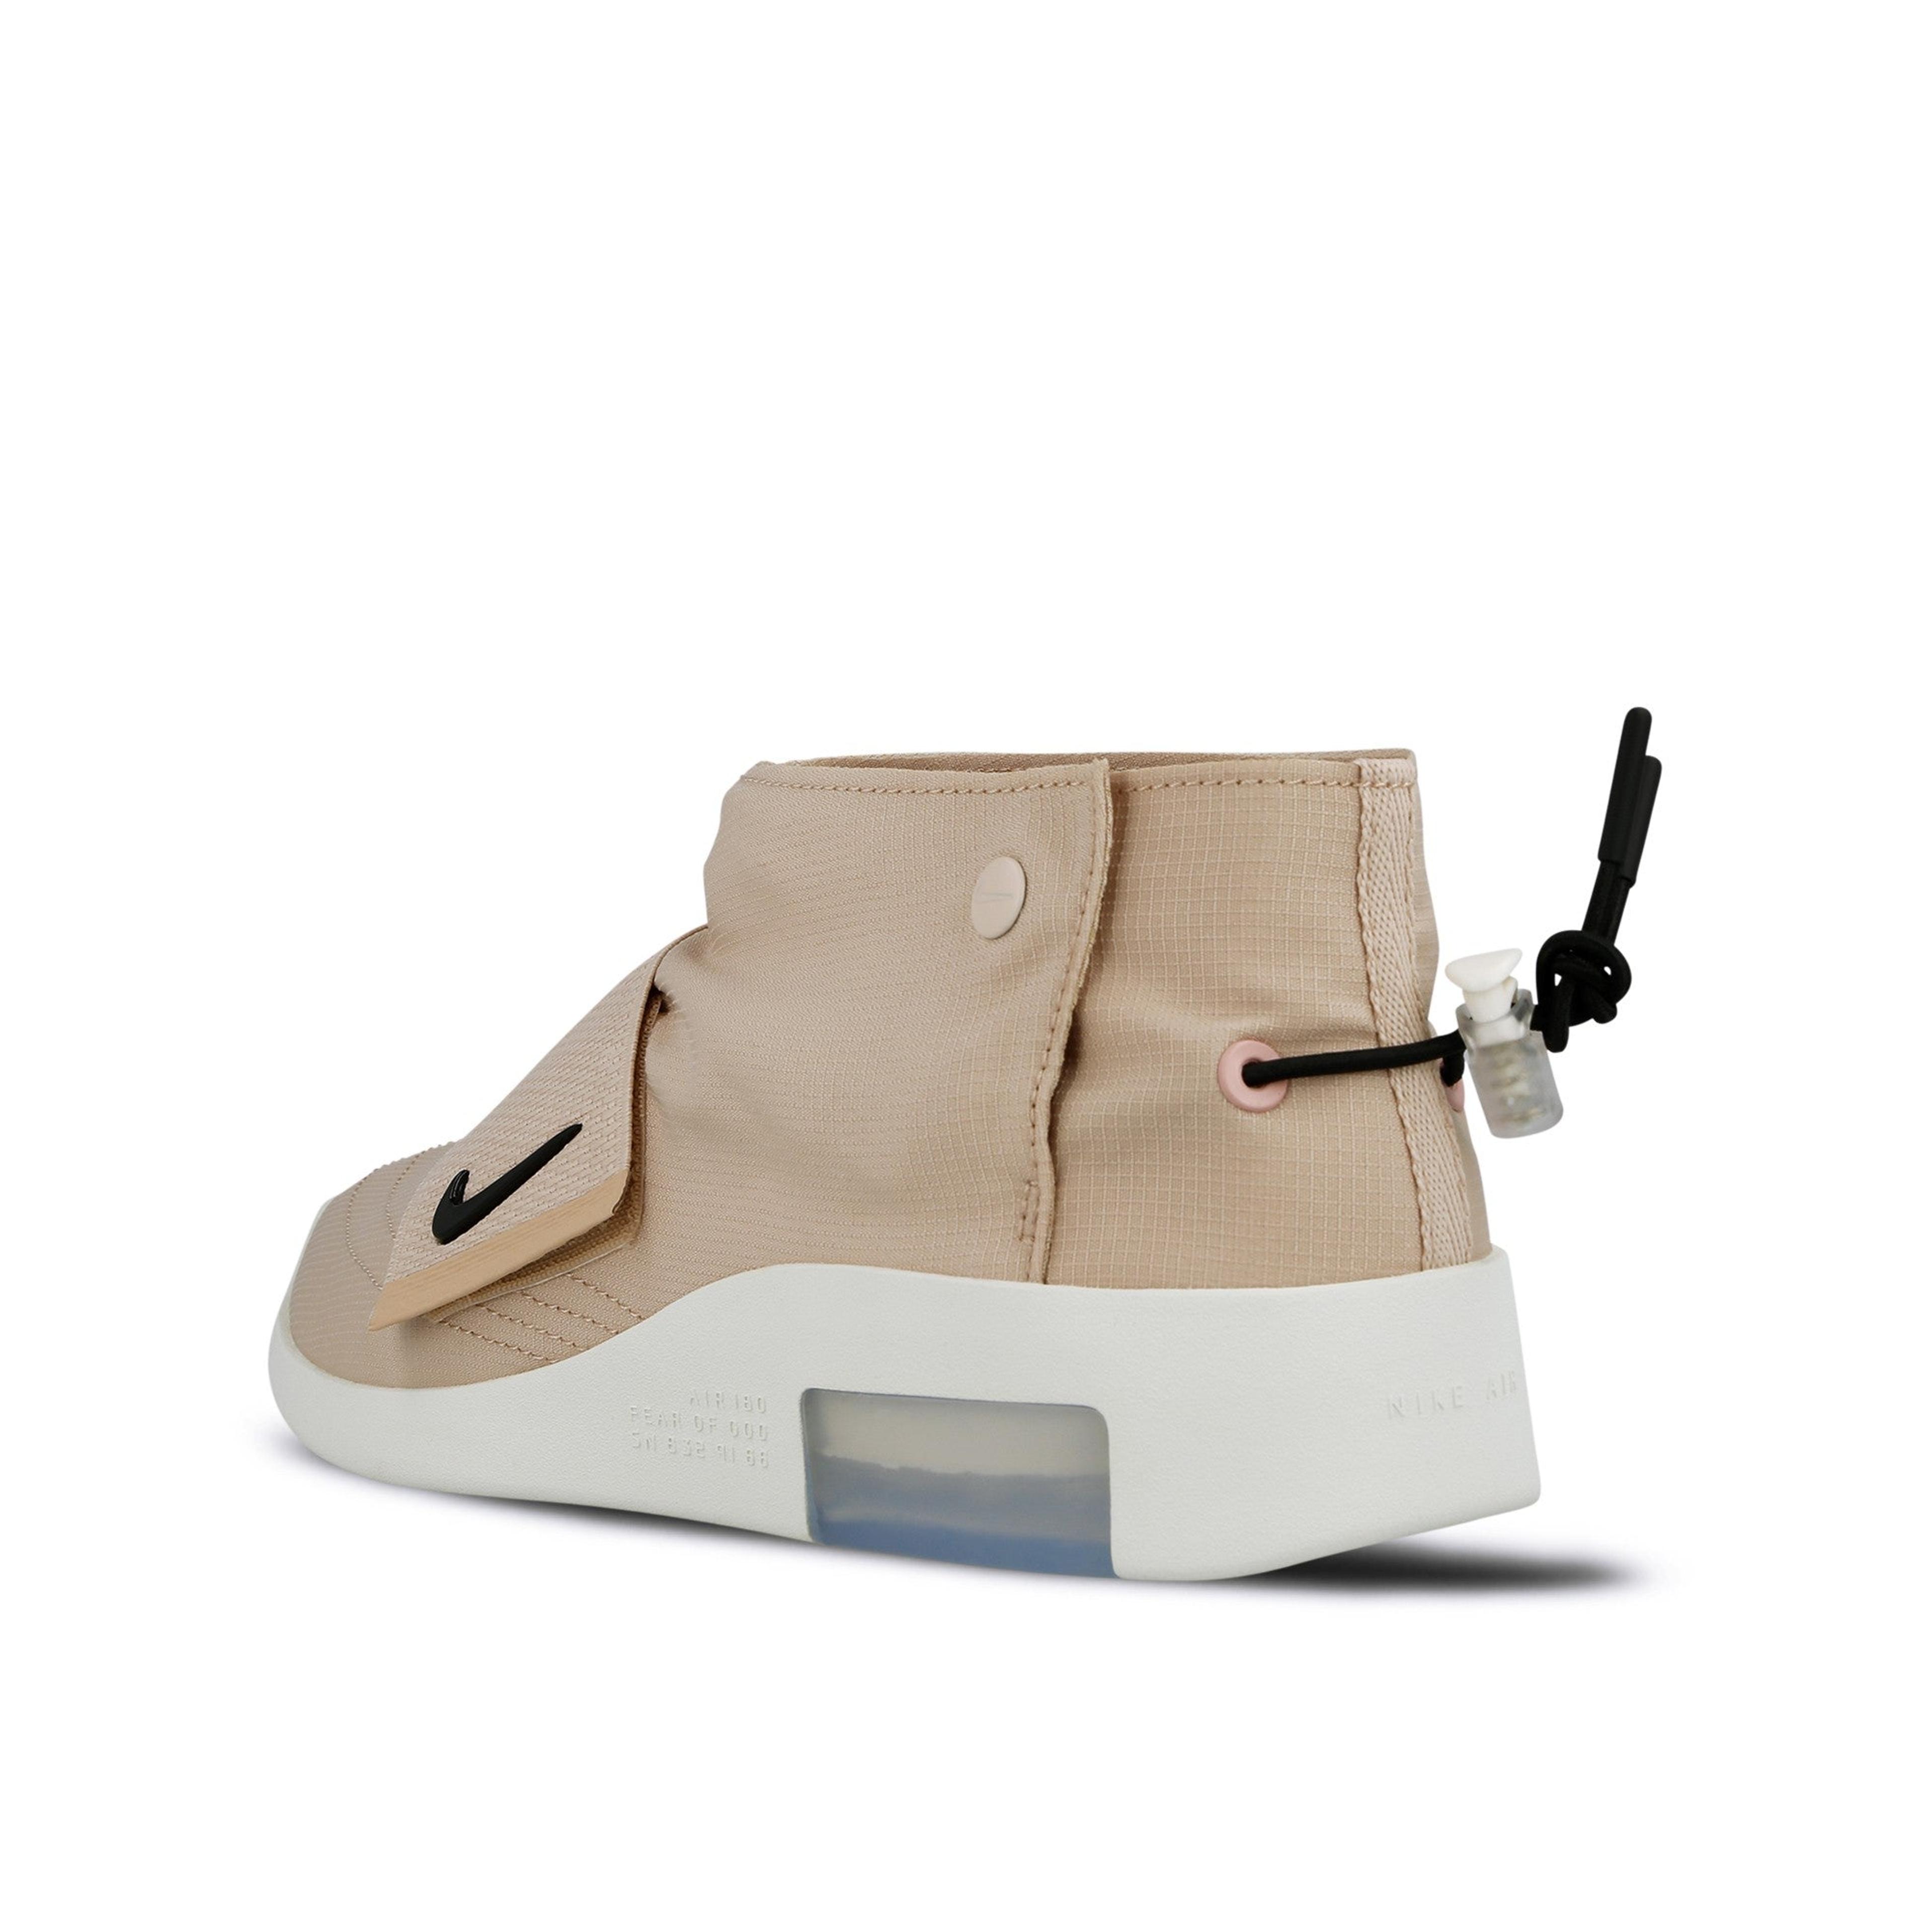 Alternate View 3 of Men's Nike Air X Fear Of God MOC "Particle Beige" AT8086 200